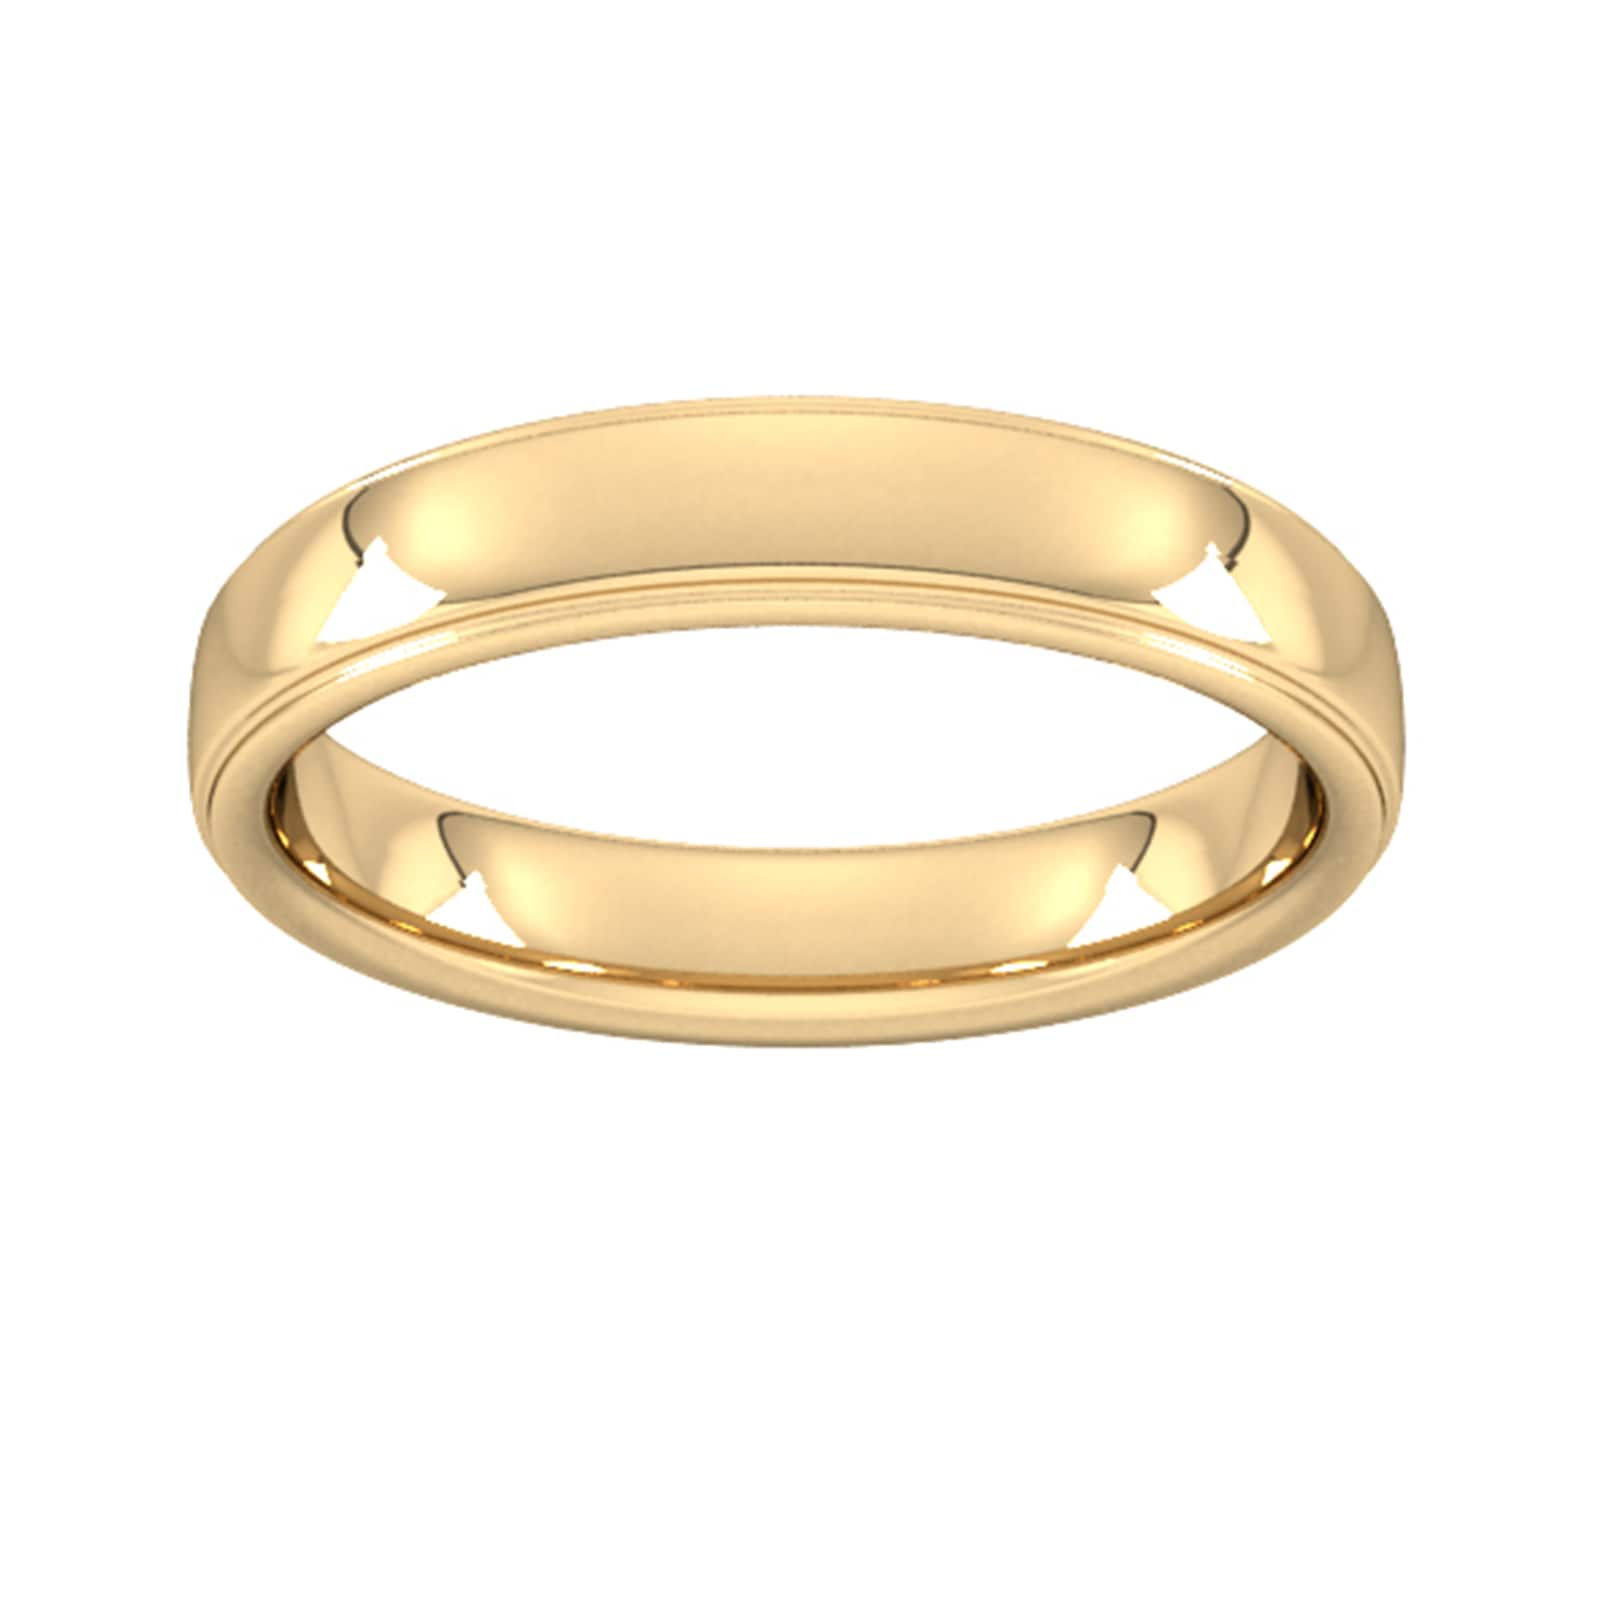 4mm Slight Court Heavy Polished Finish With Grooves Wedding Ring In 9 Carat Yellow Gold - Ring Size V